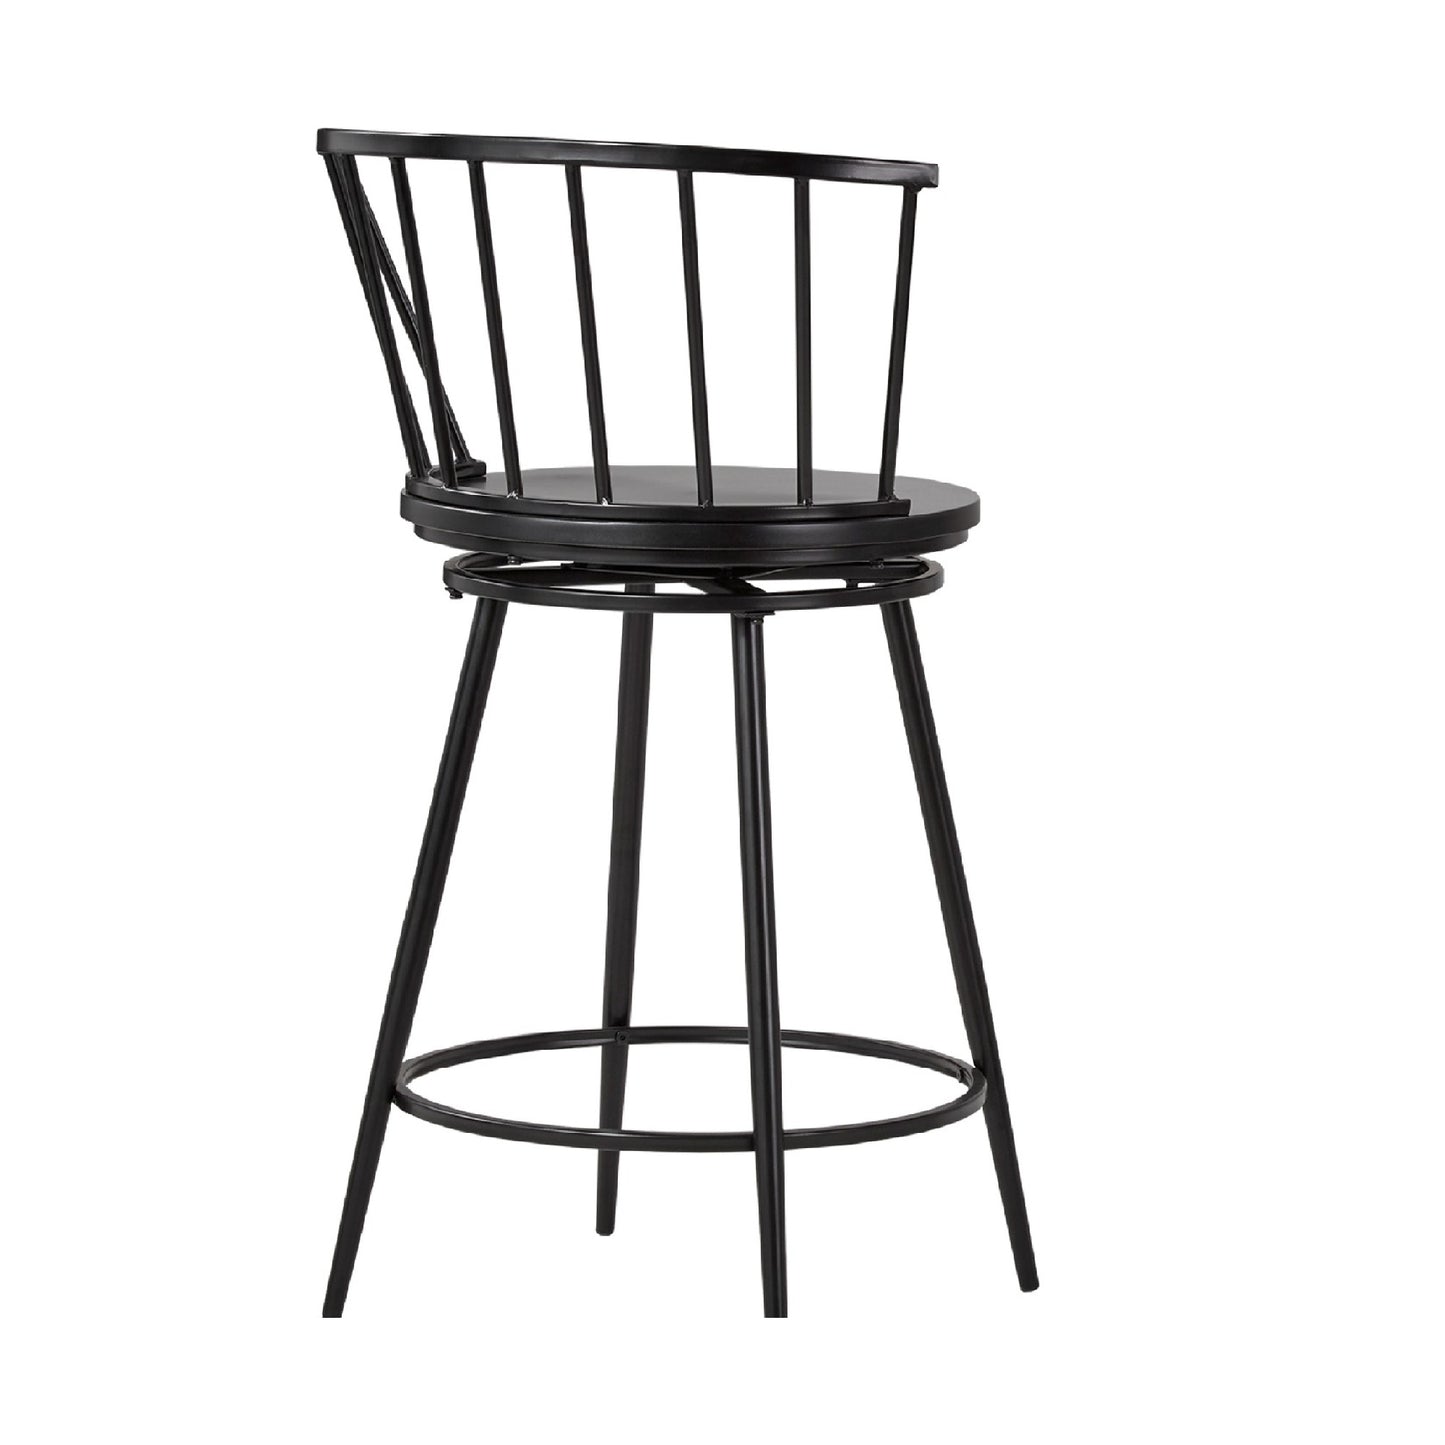 Buy Upto 55% Off on Bar Stools Chairs Online in India - Royaloak